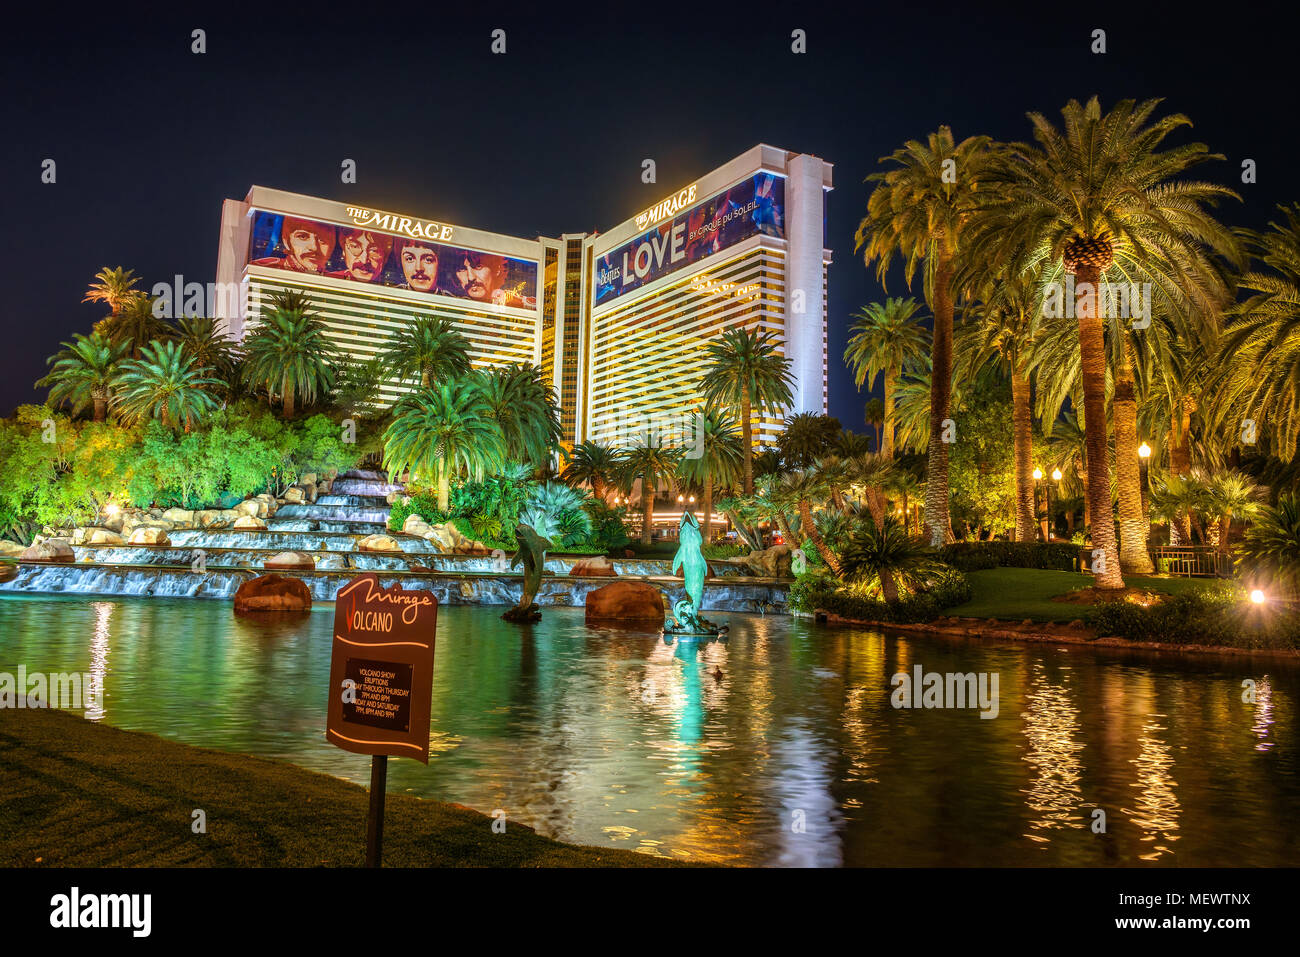 The Mirage hotel at night in Las Vegas Stock Photo